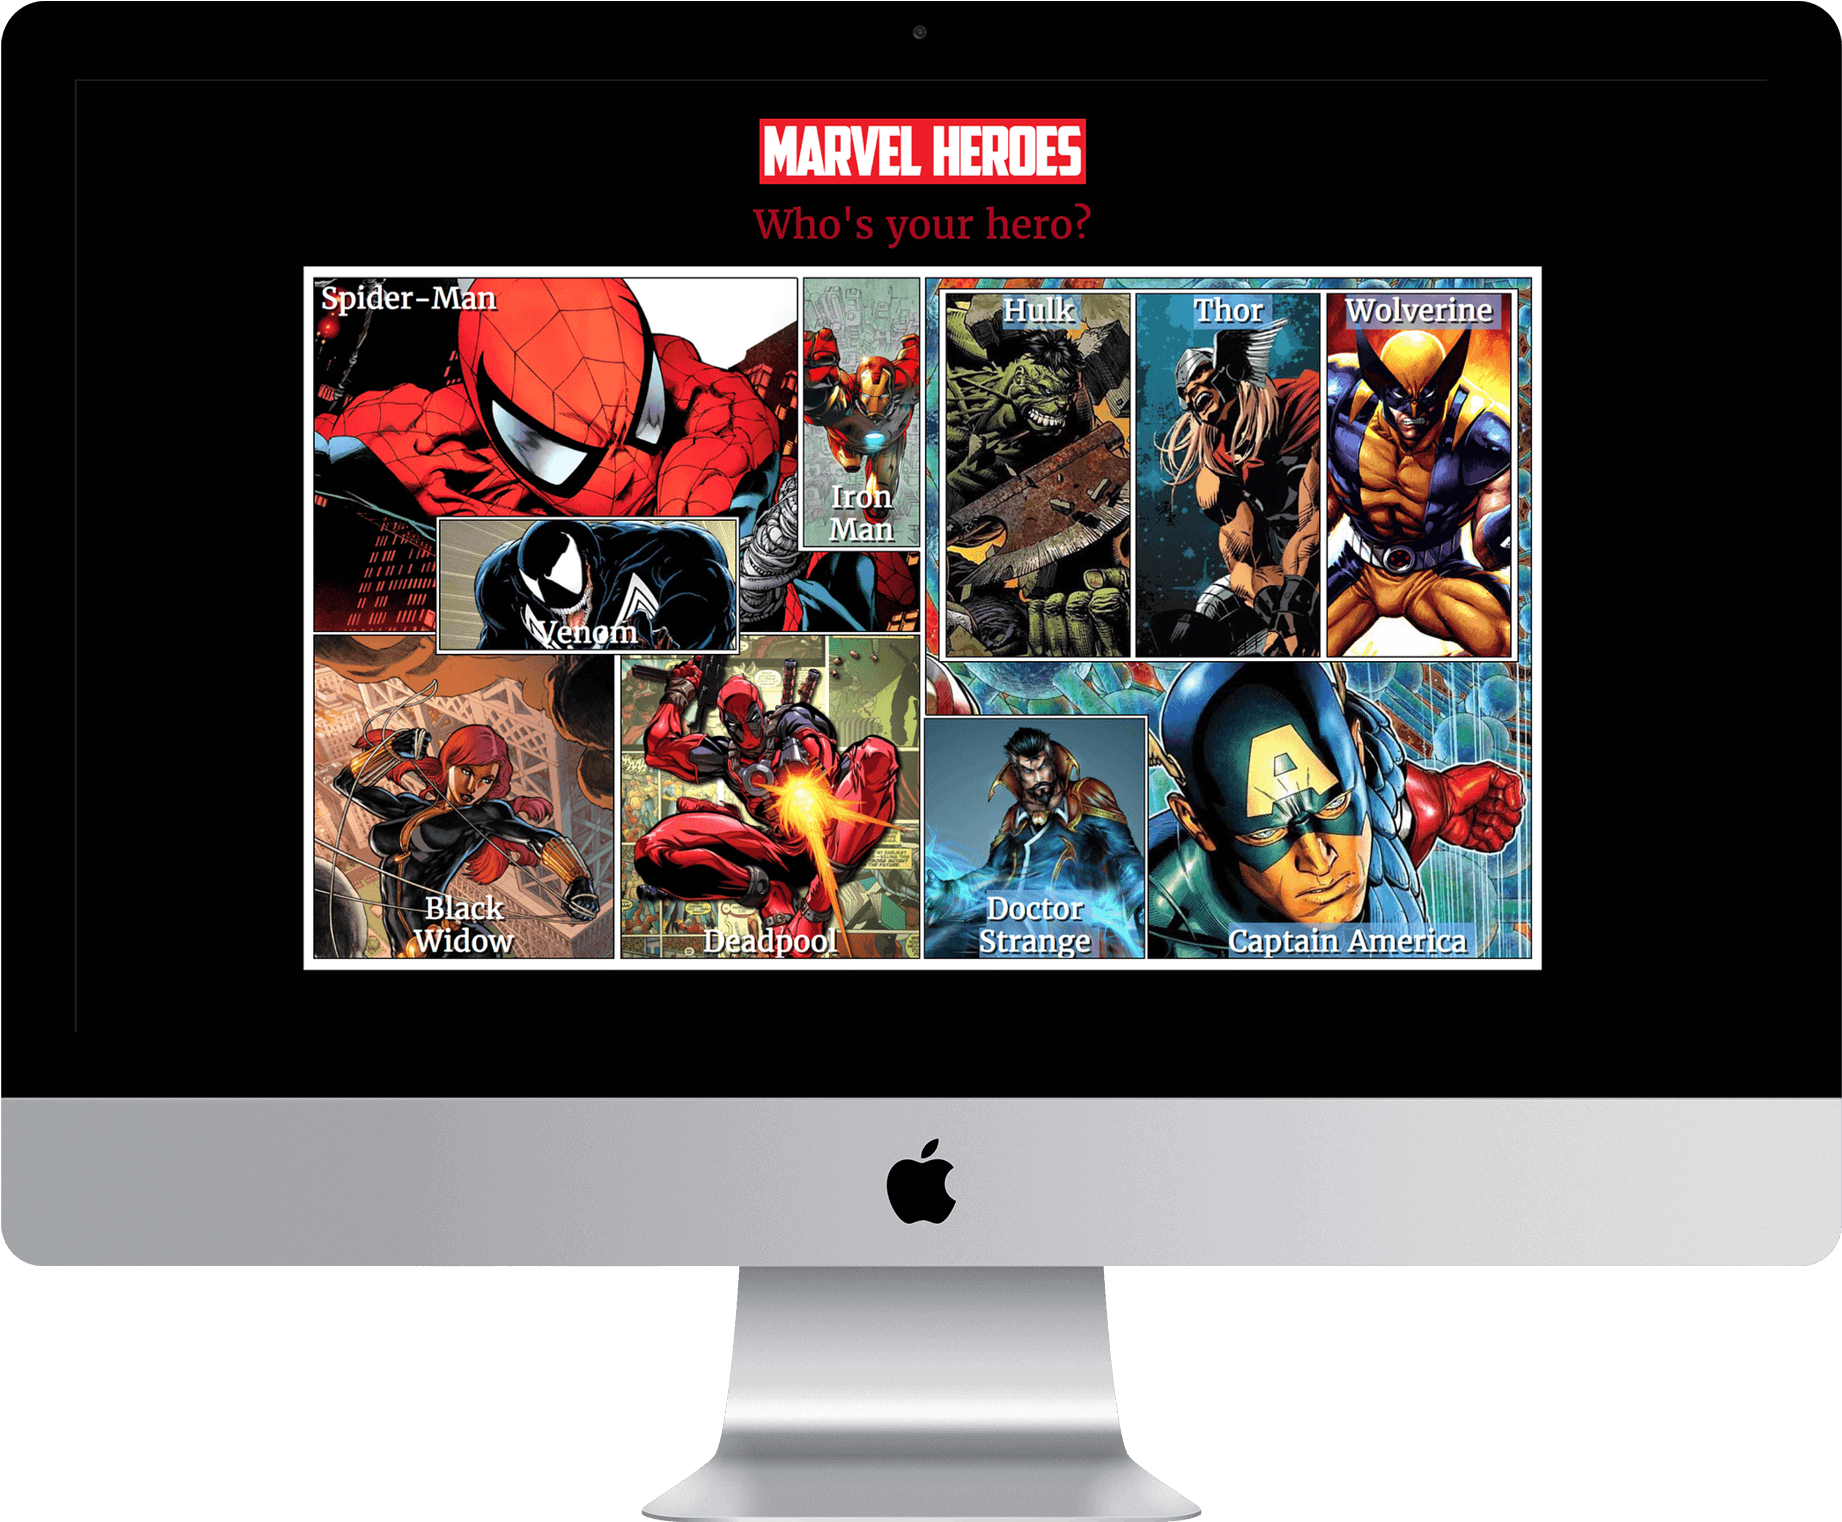 Marvel Heroes Website Is Shown On Macbook - Poster: Avengers No. 32: Captain America, 91x61cm. (2000x2000), Png Download